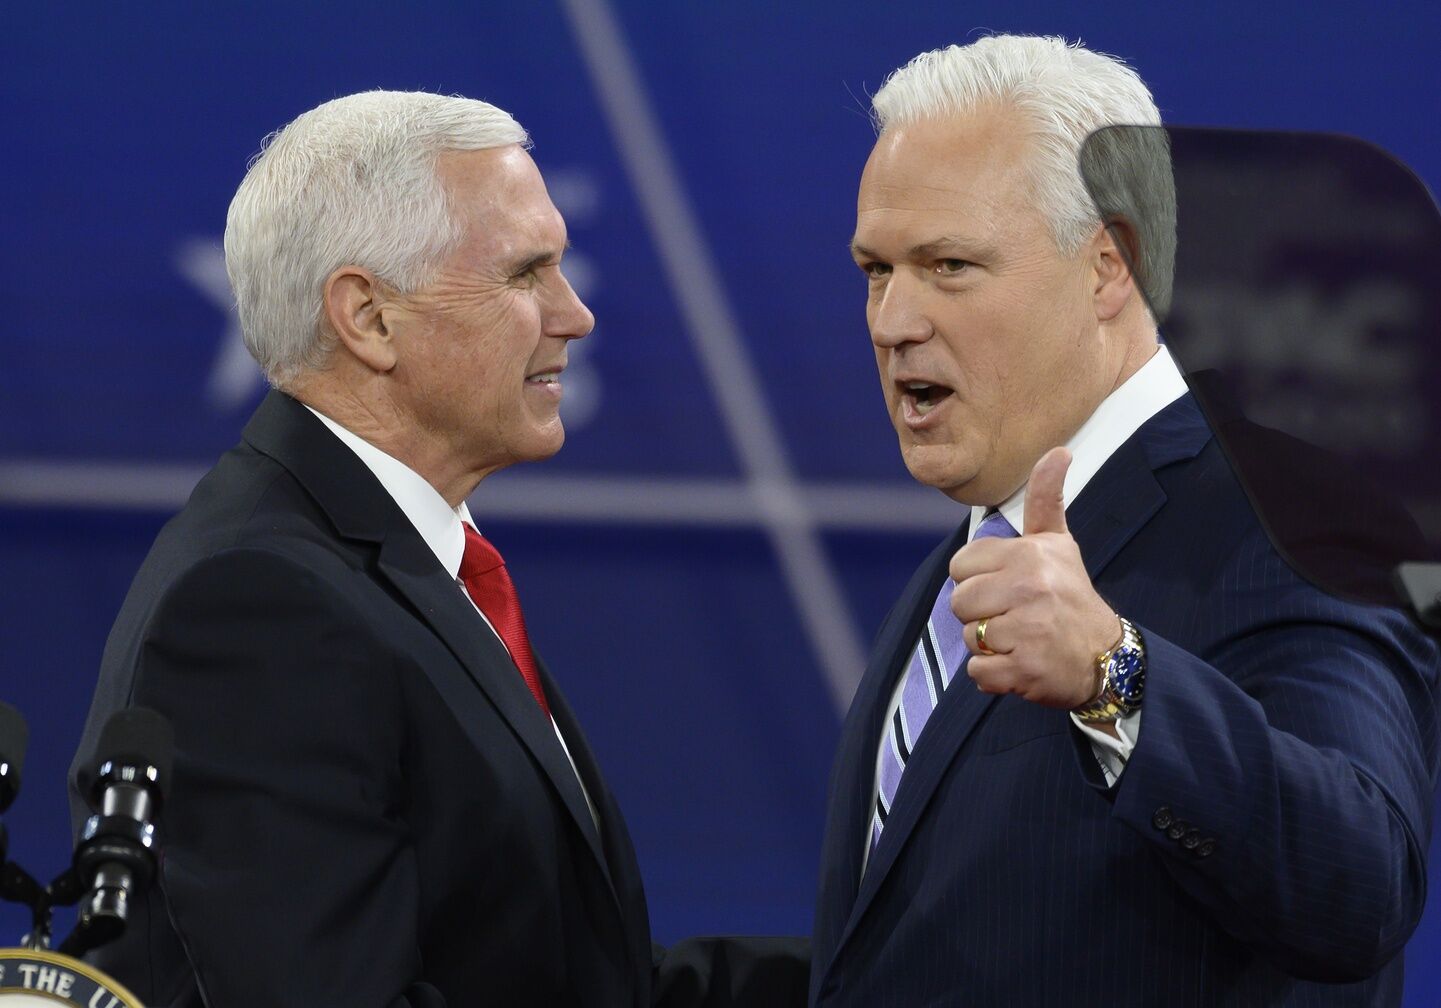 Feb 27, 2020: Vice President Mike Pence is introduced by Matt Schlapp at the Conservative Political Action Conference (CPAC)